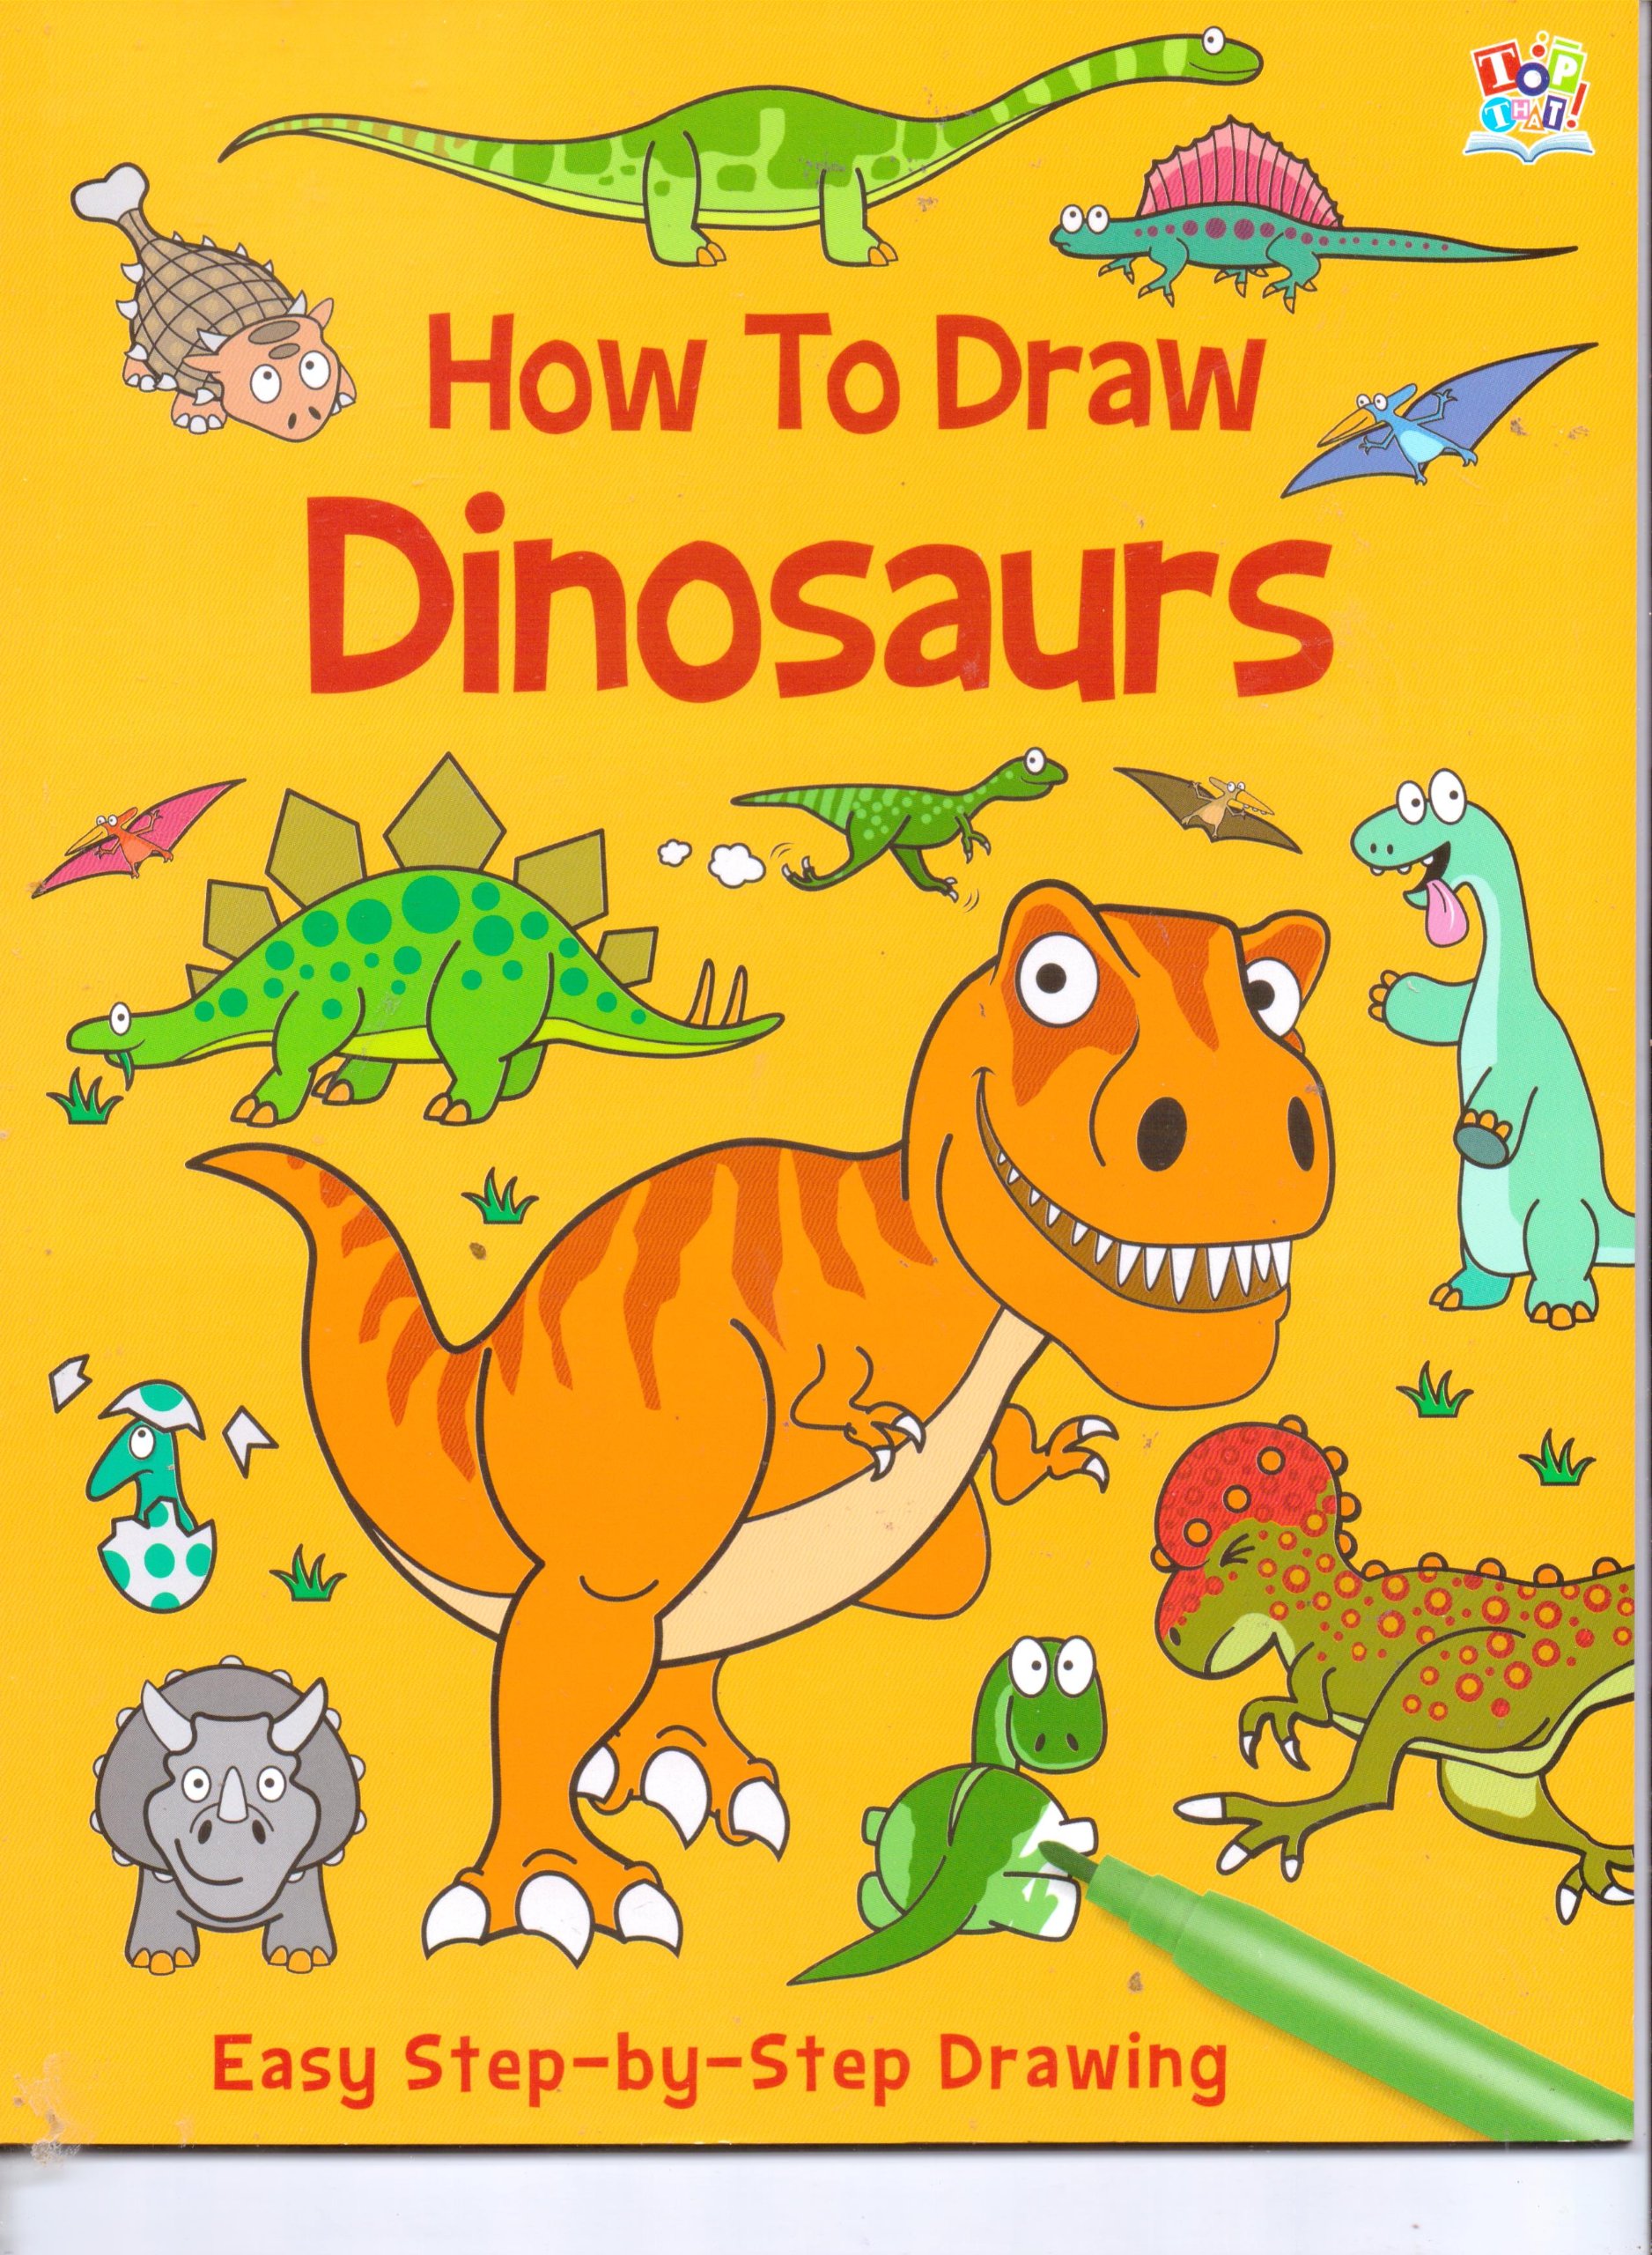 Step By Step Drawing Dinosaurs at Explore